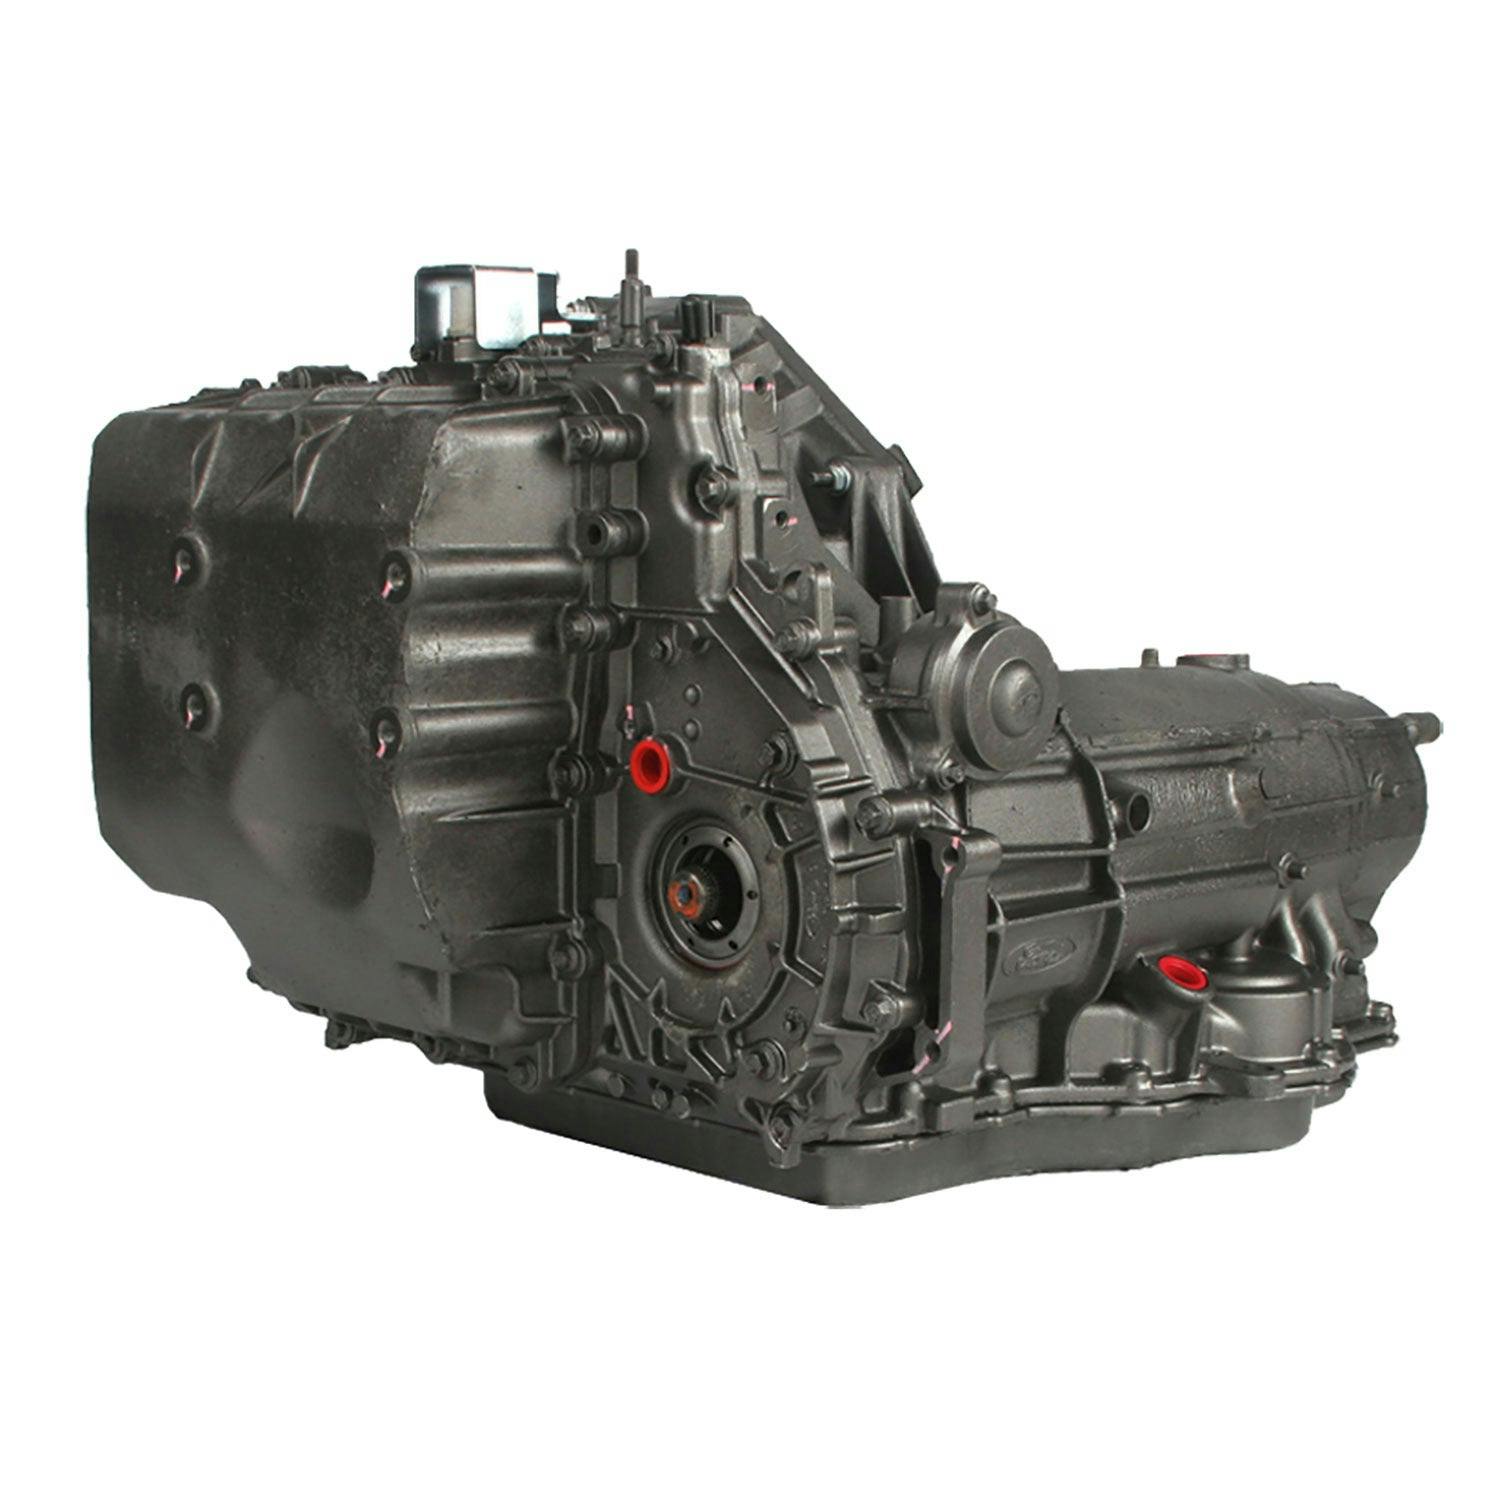 Automatic Transmission for 1998 Ford Taurus FWD with 3.4L V8 Engine